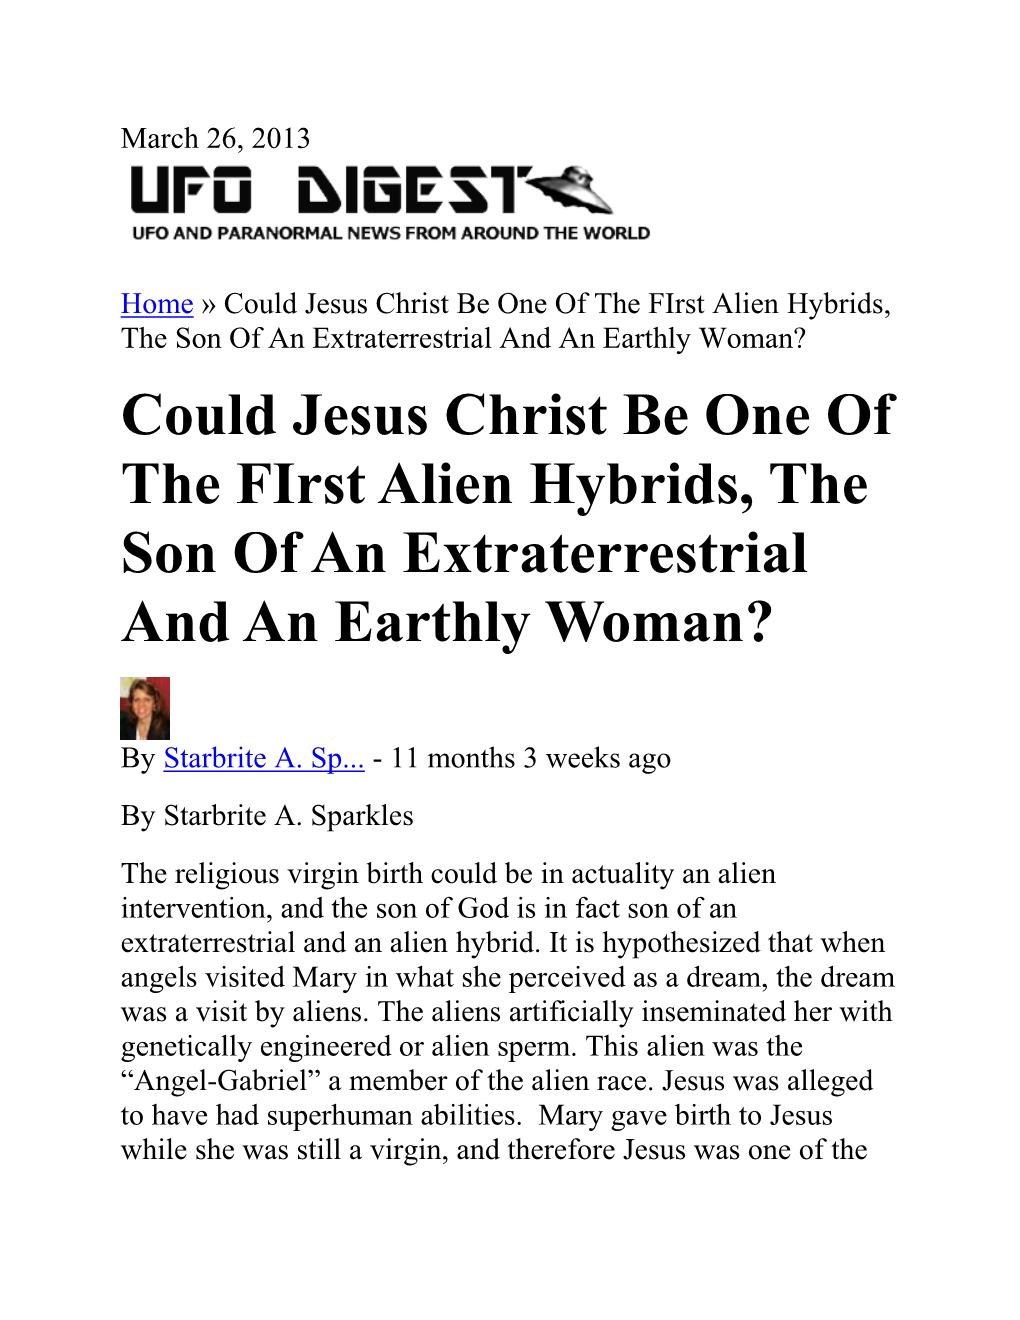 Could Jesus Christ Be One of the First Alien Hybrids, the Son of An